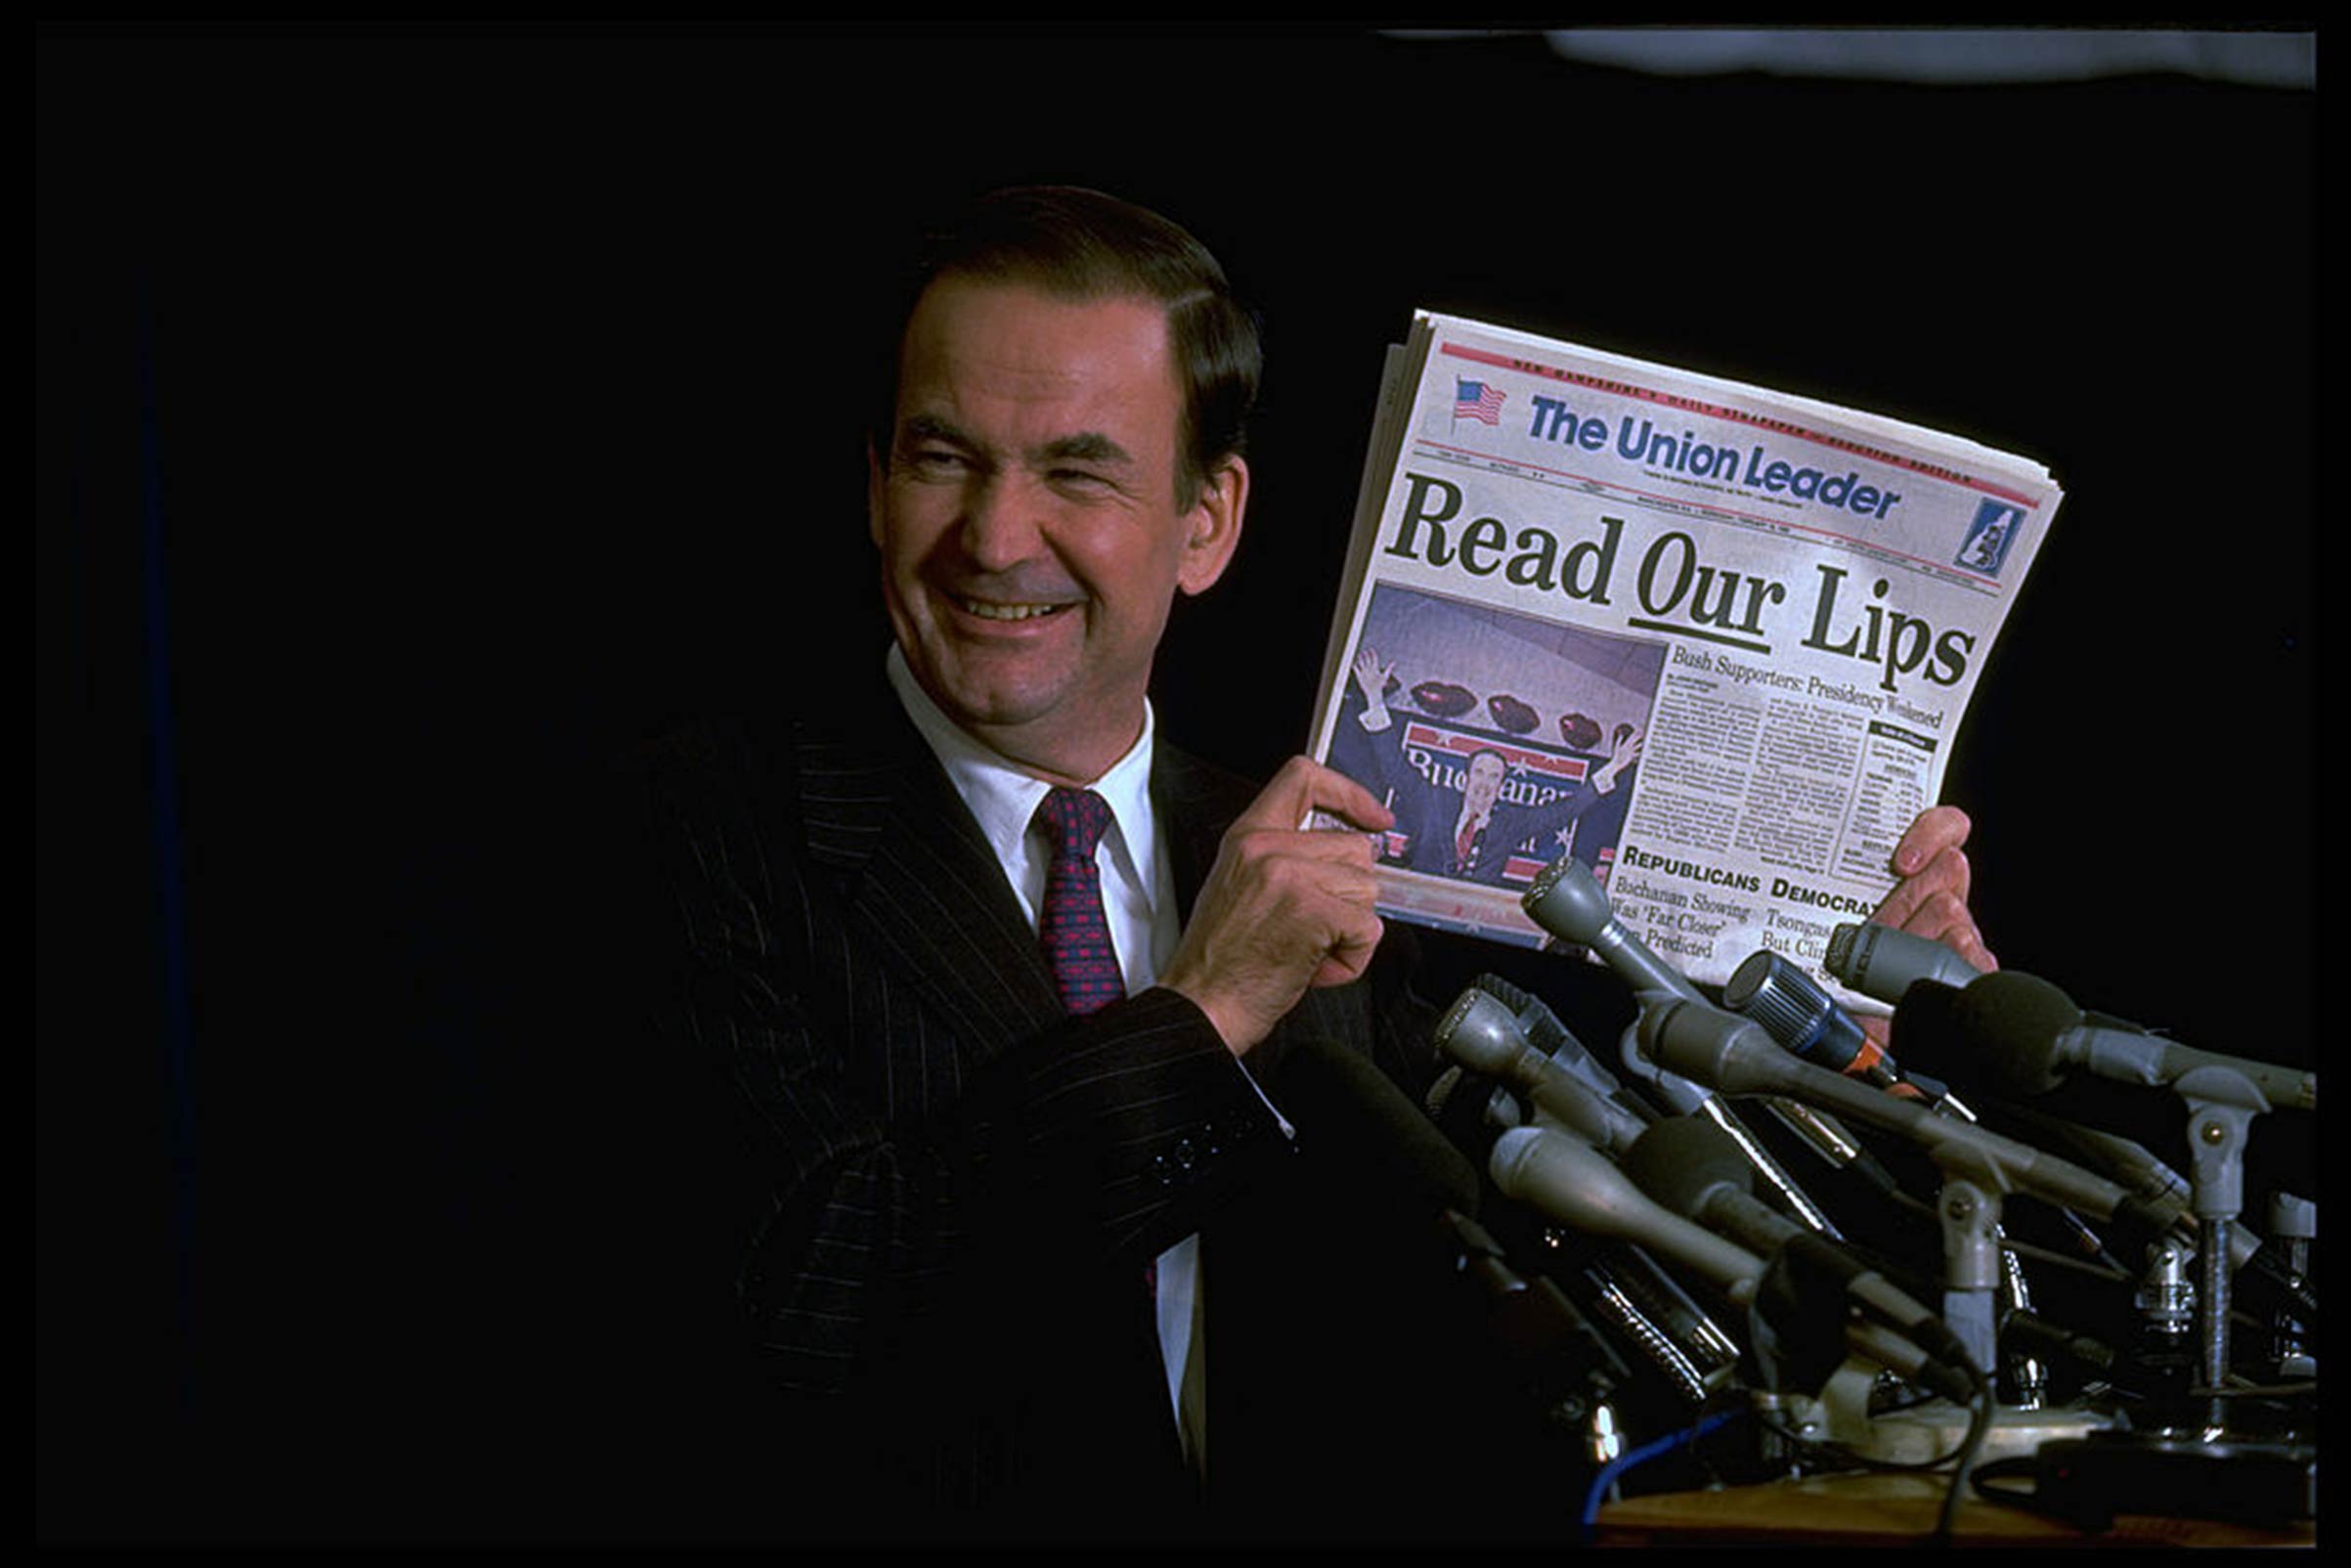 Conservative Republican presidential hopeful Pat Buchanan displaying The New Hampshire <i>Union Leader</i> headlining his triumph and threat to frontrunner and incumbent President George H.W. Bush on Feb. 1, 1992. (Steve Liss/The LIFE Images Collection—Getty Images)